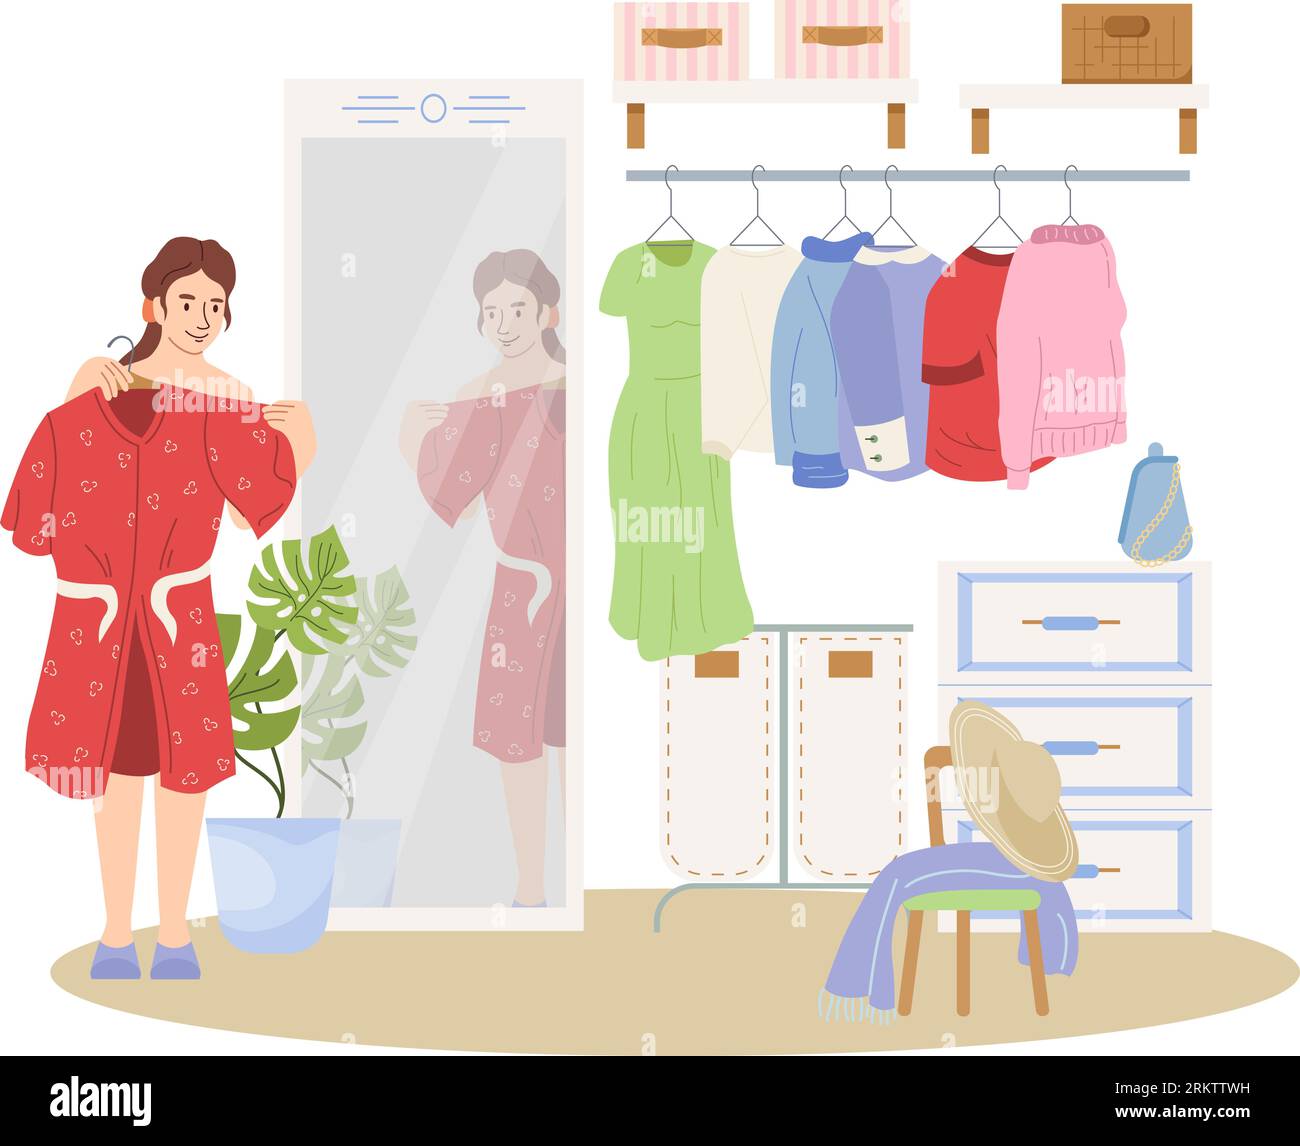 Home cloakroom flat composition with young girl trying on dress in front of mirror vector illustration Stock Vector